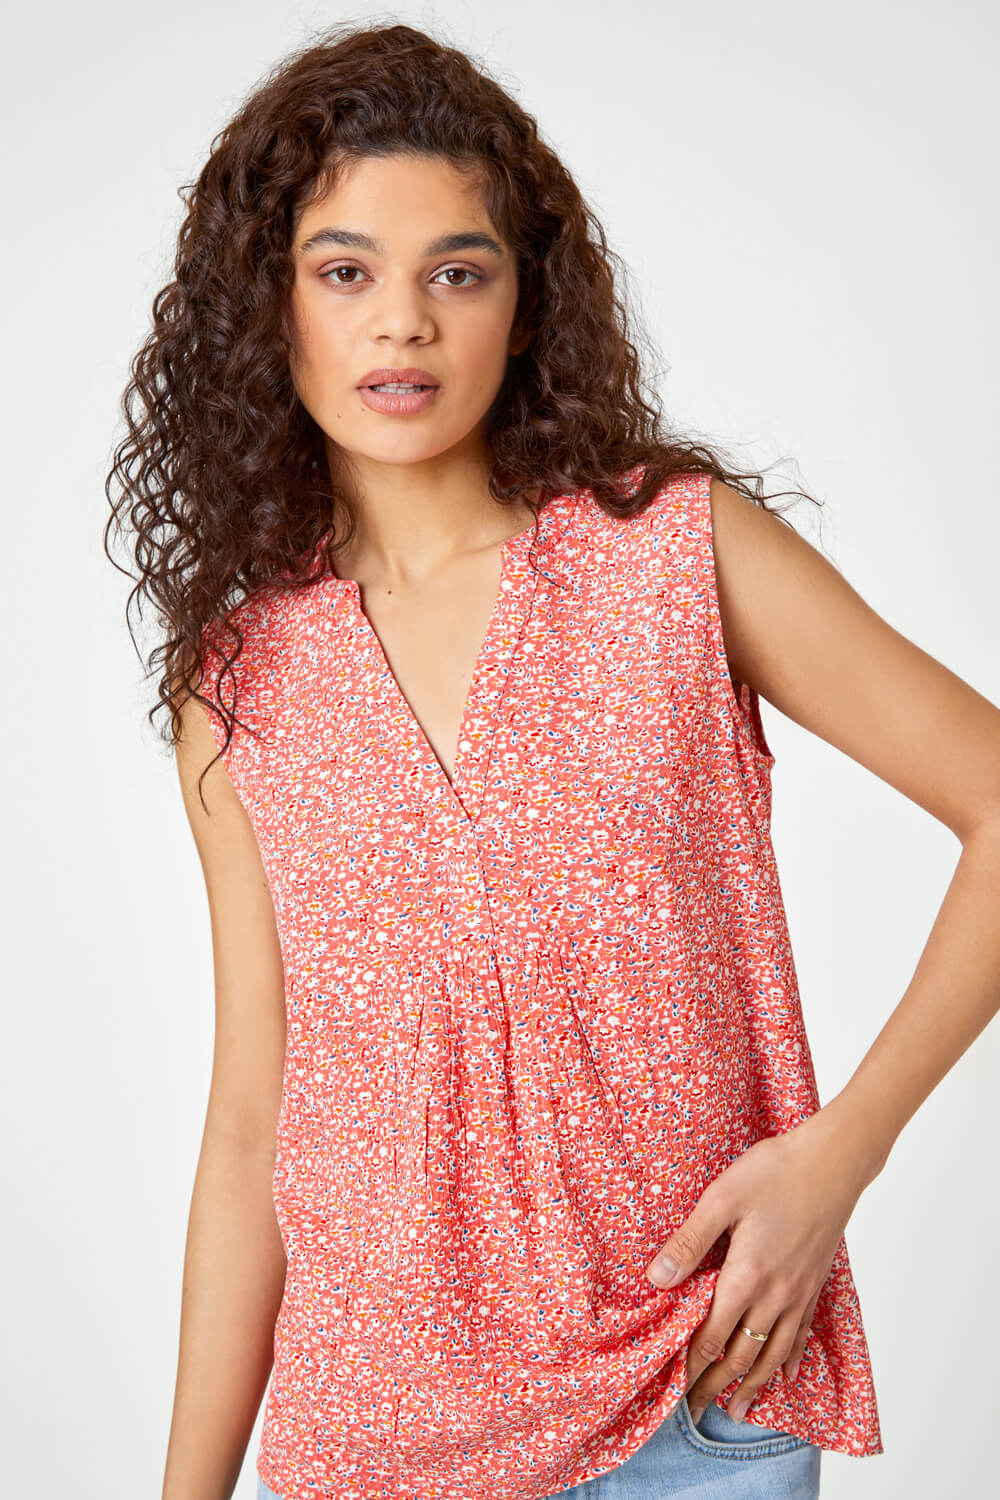 Red Sleeveless Ditsy Floral Print Top, Image 2 of 5